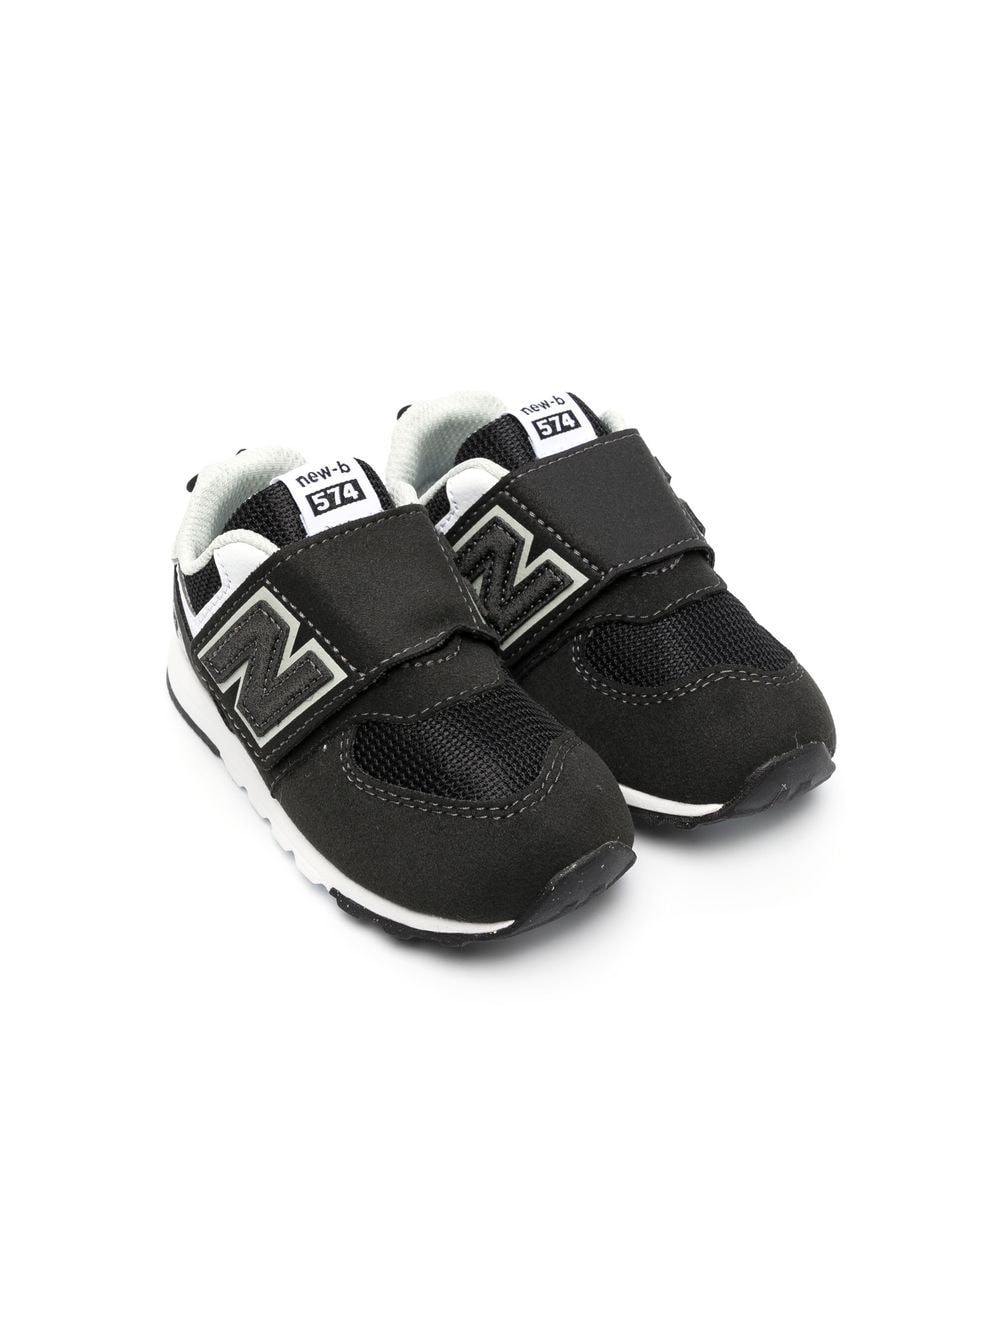 New Balance Kids 574 touch-strap sneakers - Black